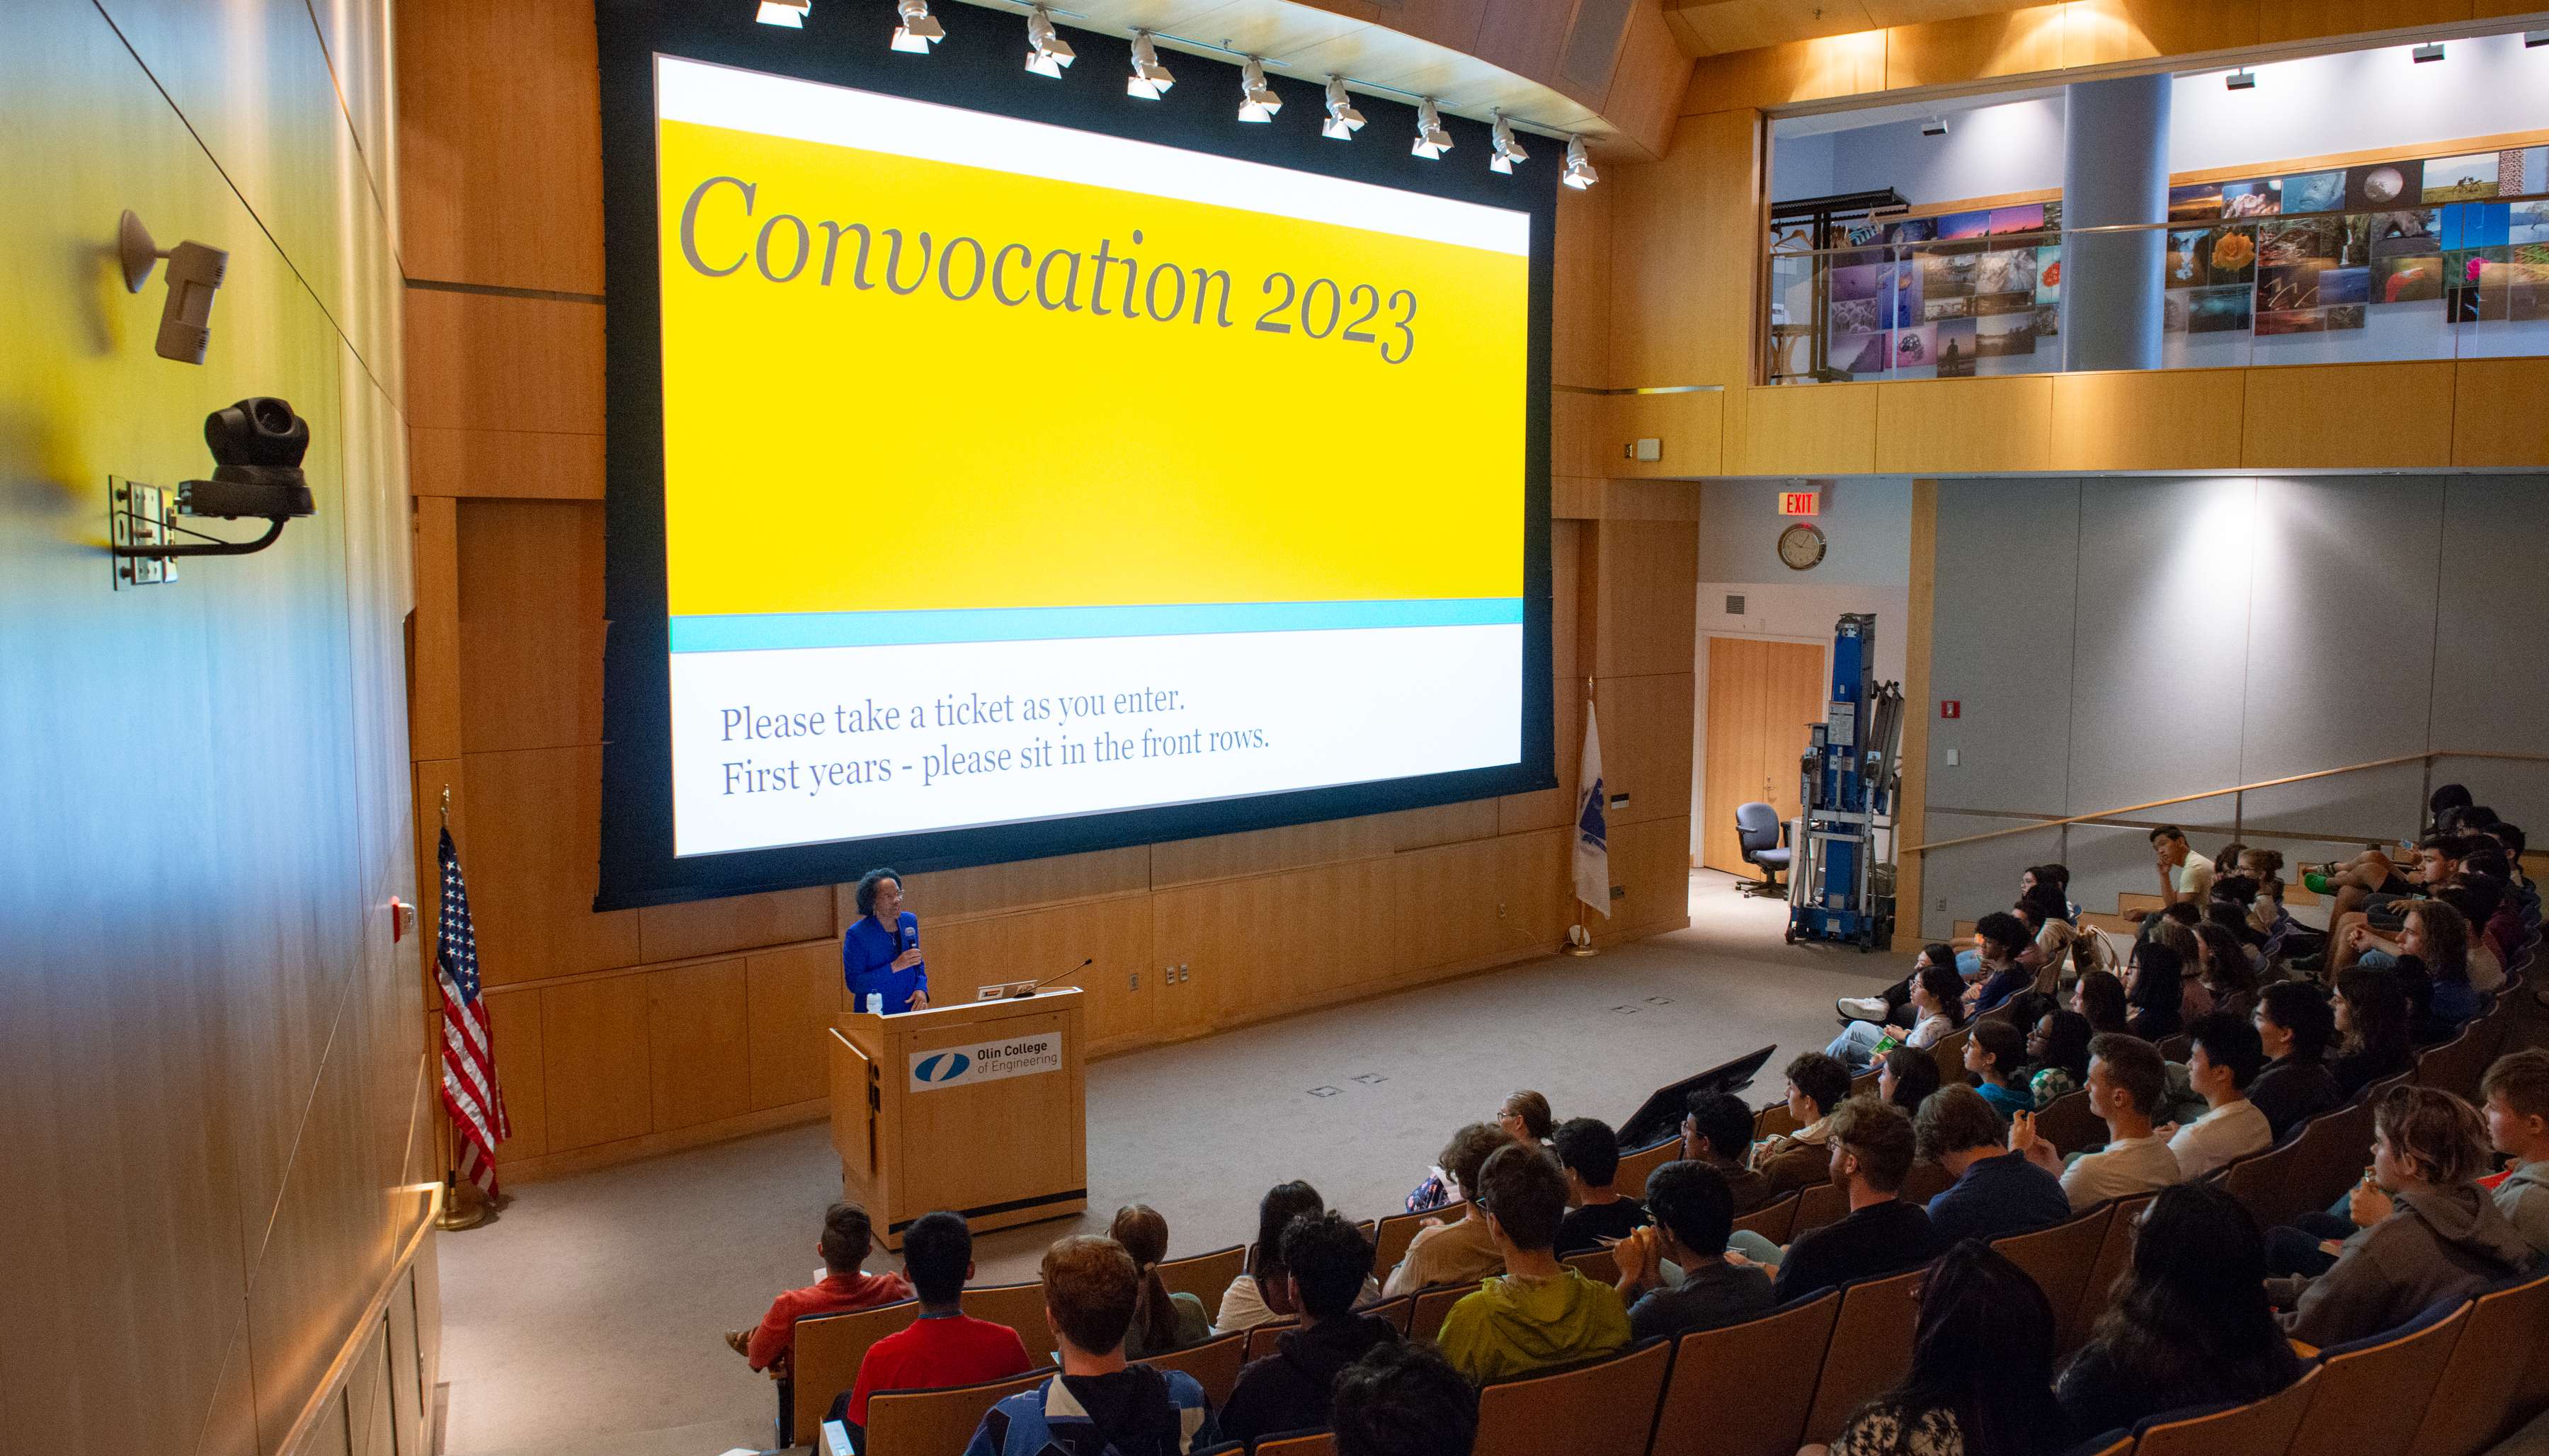 Read Olin Celebrates Convocation 2023! by Olin College of Engineering